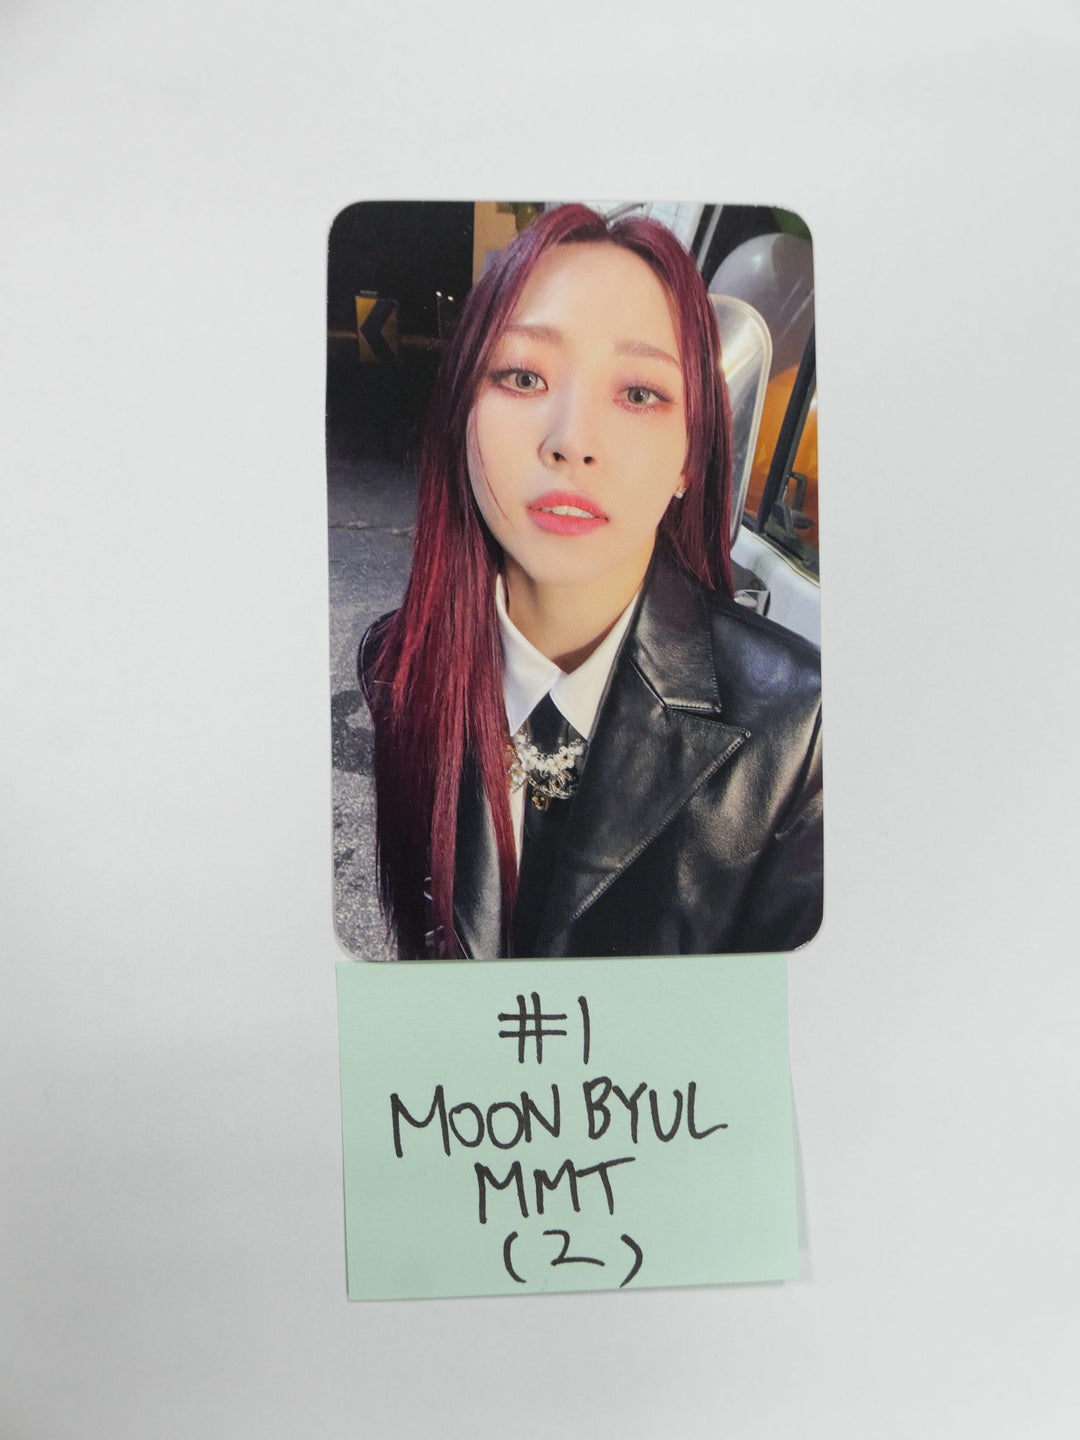 Moon Byul (Of Mamamoo) "6equence" - MMT Pre-Order Benefit Photocard